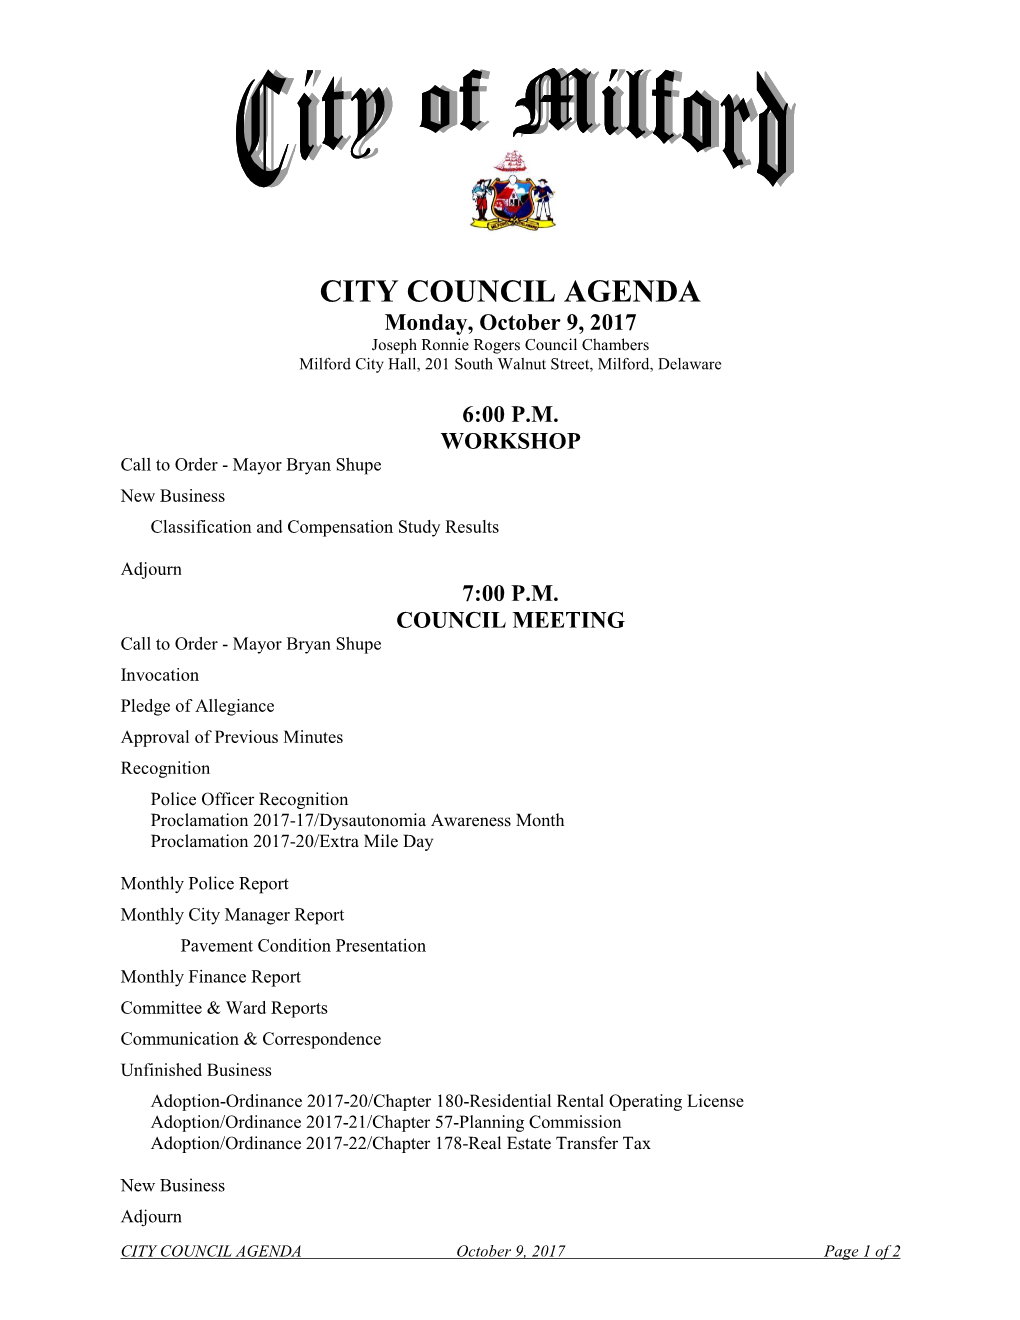 CITY COUNCIL AGENDA Monday, October 9, 2017 Joseph Ronnie Rogers Council Chambers Milford City Hall, 201 South Walnut Street, Milford, Delaware